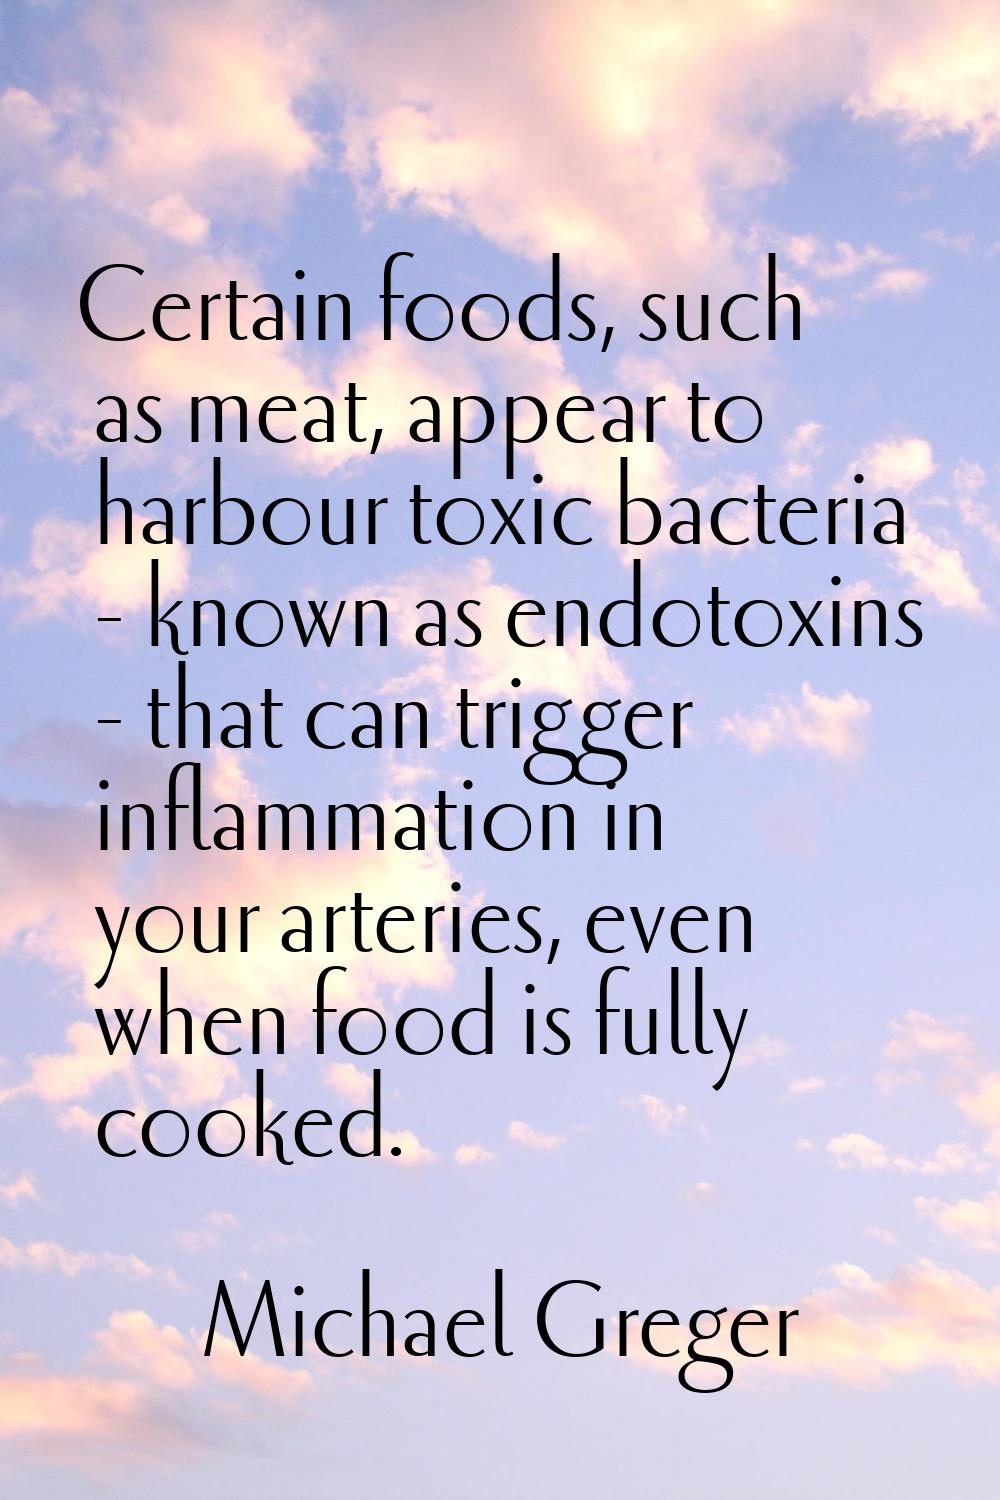 Certain foods, such as meat, appear to harbour toxic bacteria - known as endotoxins - that can trig